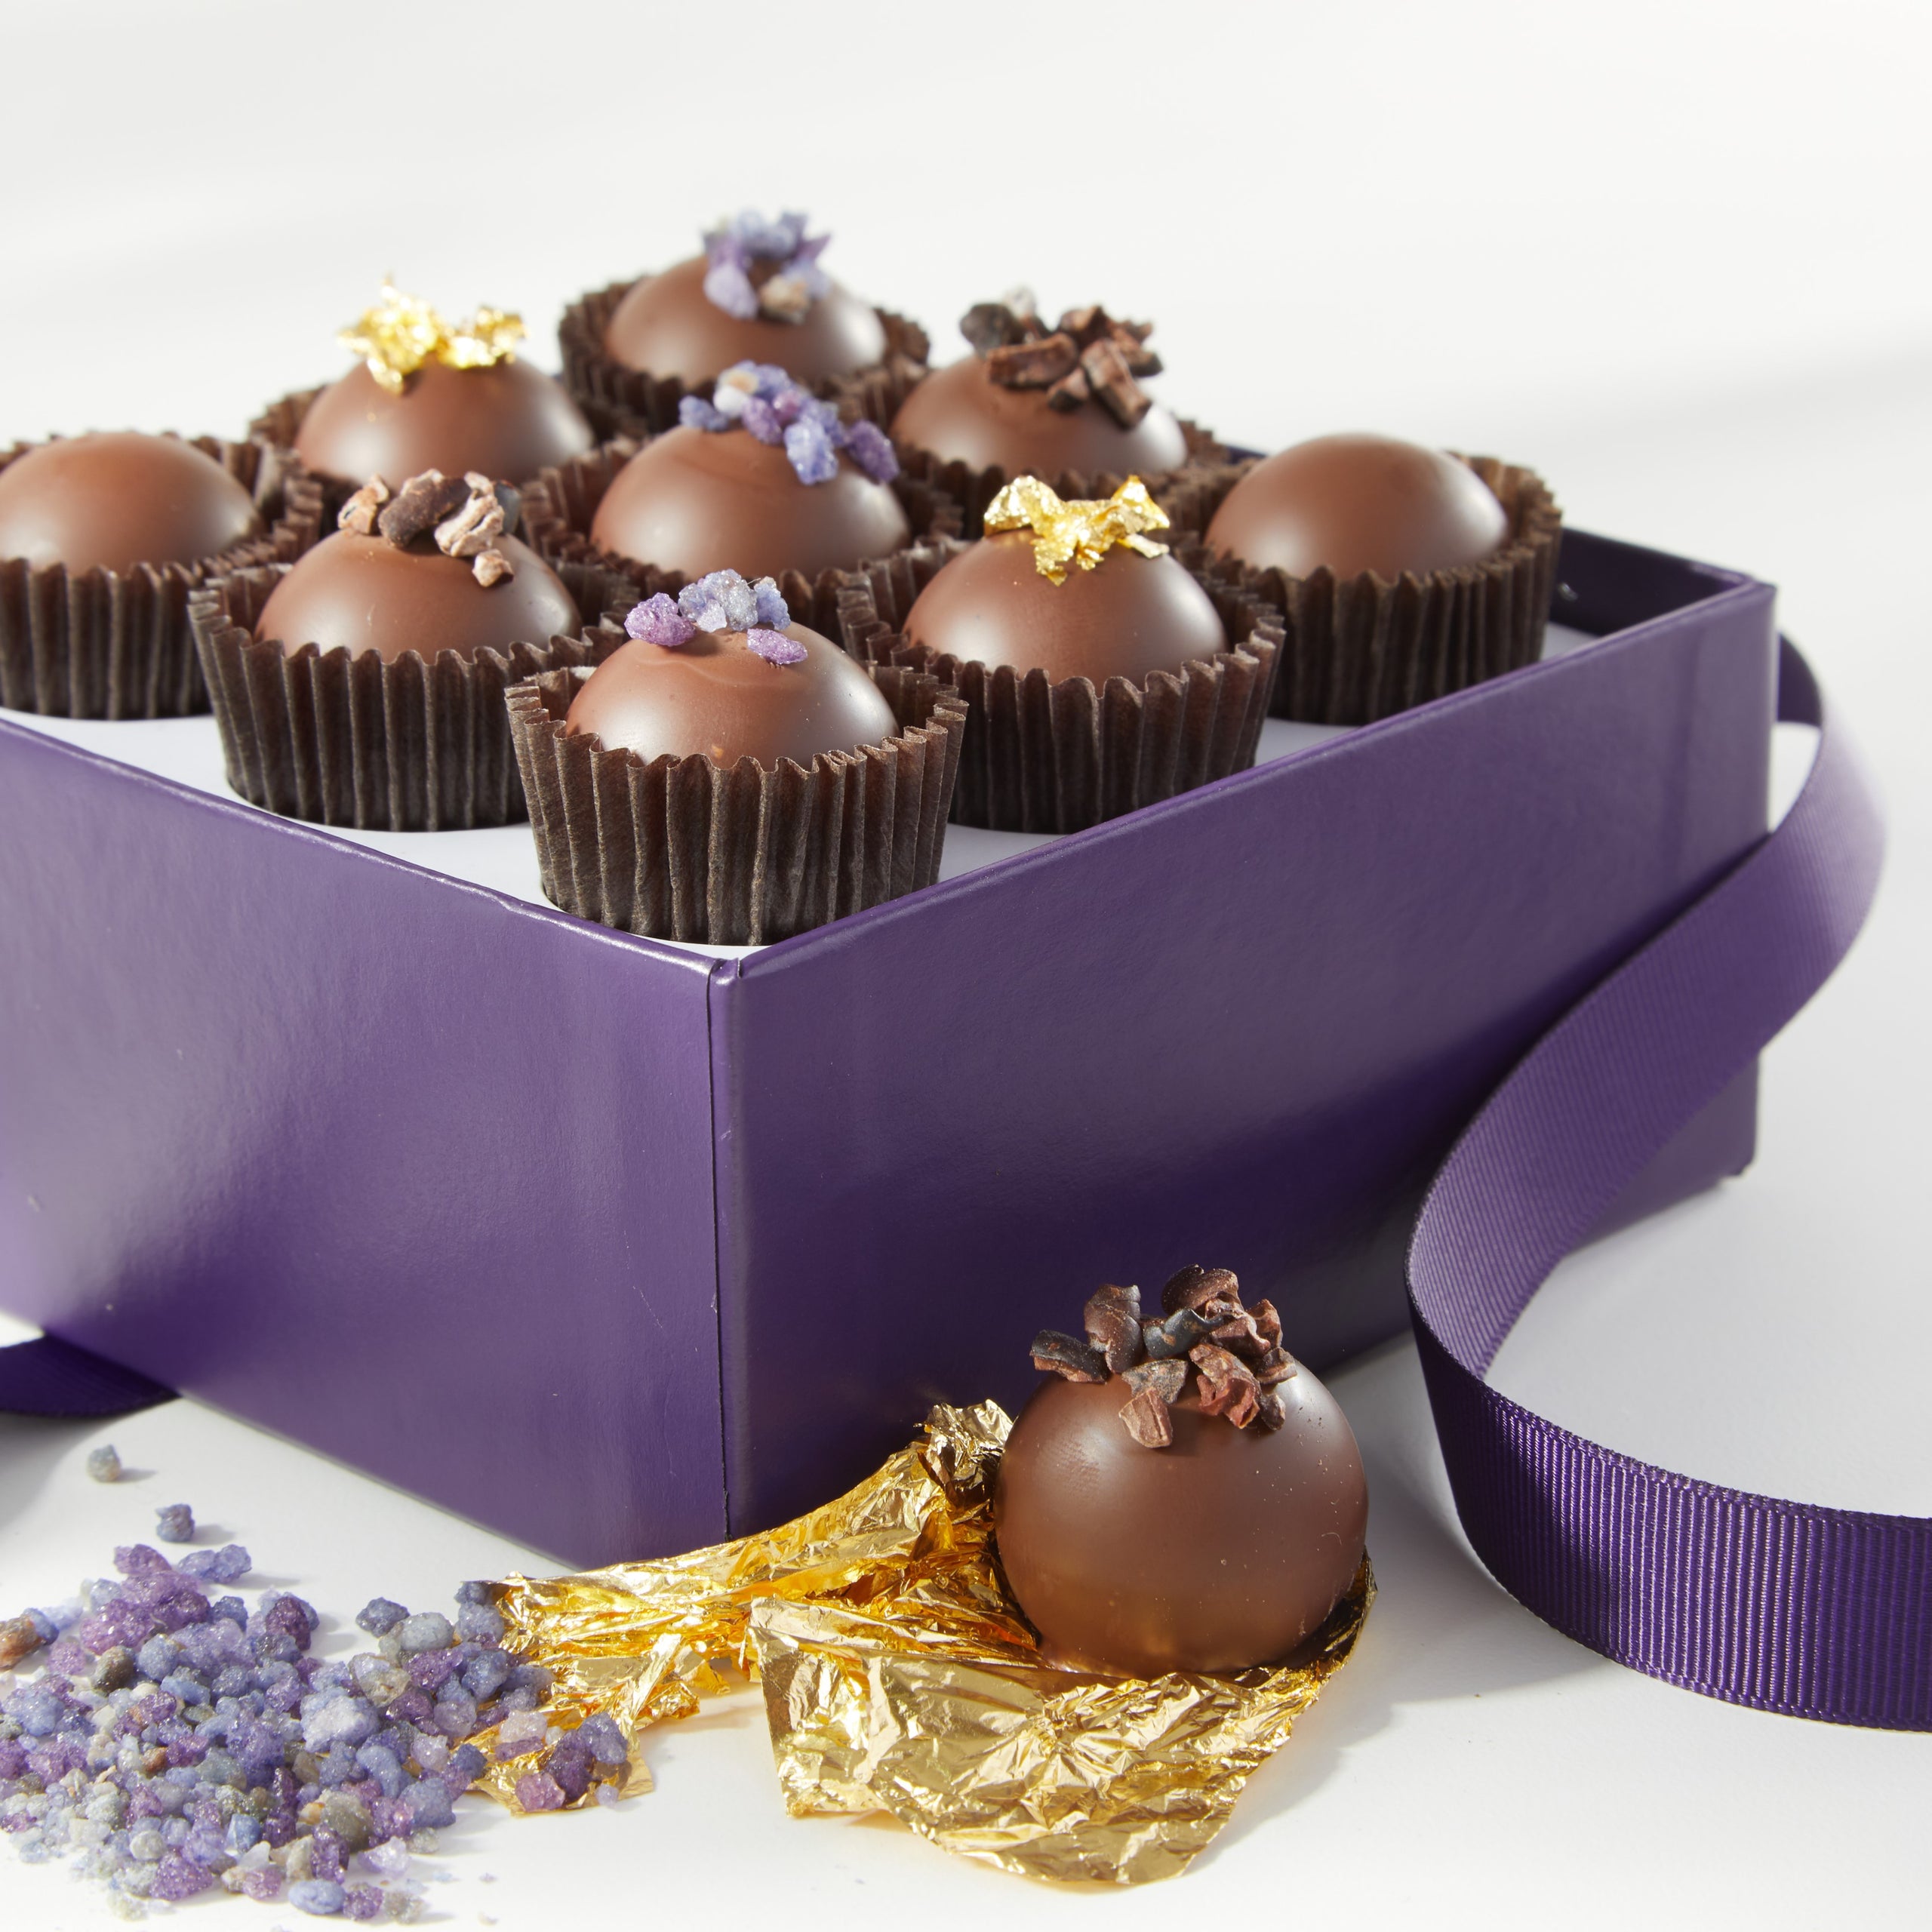 Close up view of a Vosges Praline collection box opened revealing 9 milk chocolate truffles adorned with crystalized violets, coco nibs and 24kt gold leaf on a white background.